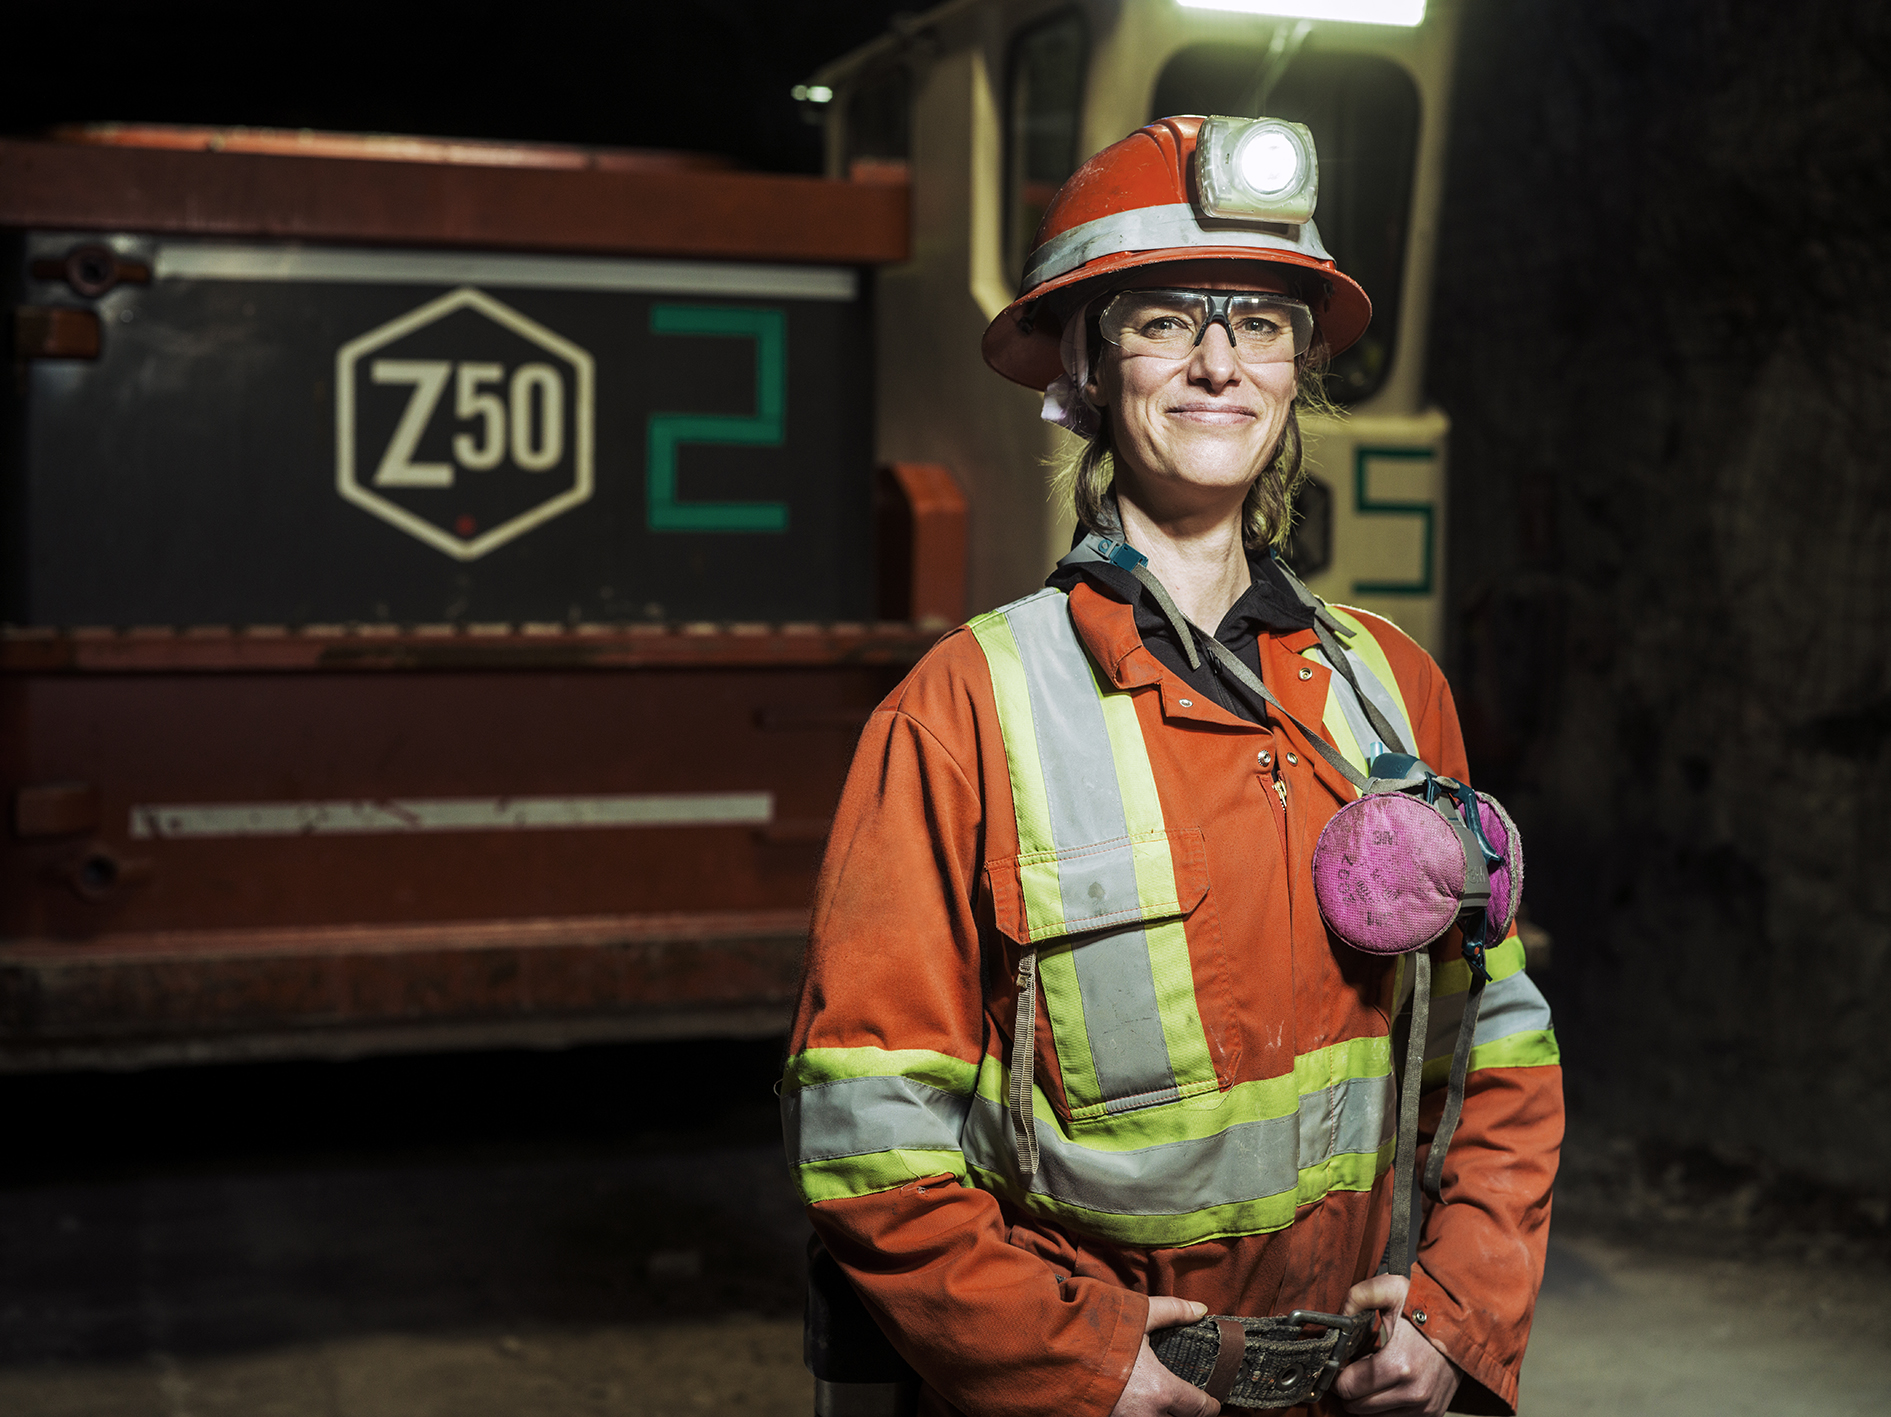 Operator Andrena Moore started at Brucejack in 2015 working snow removal before moving to surface operations a few years later and transitioning underground in 2021. She has more than 1,100 hours operating Sandvik Z50s.